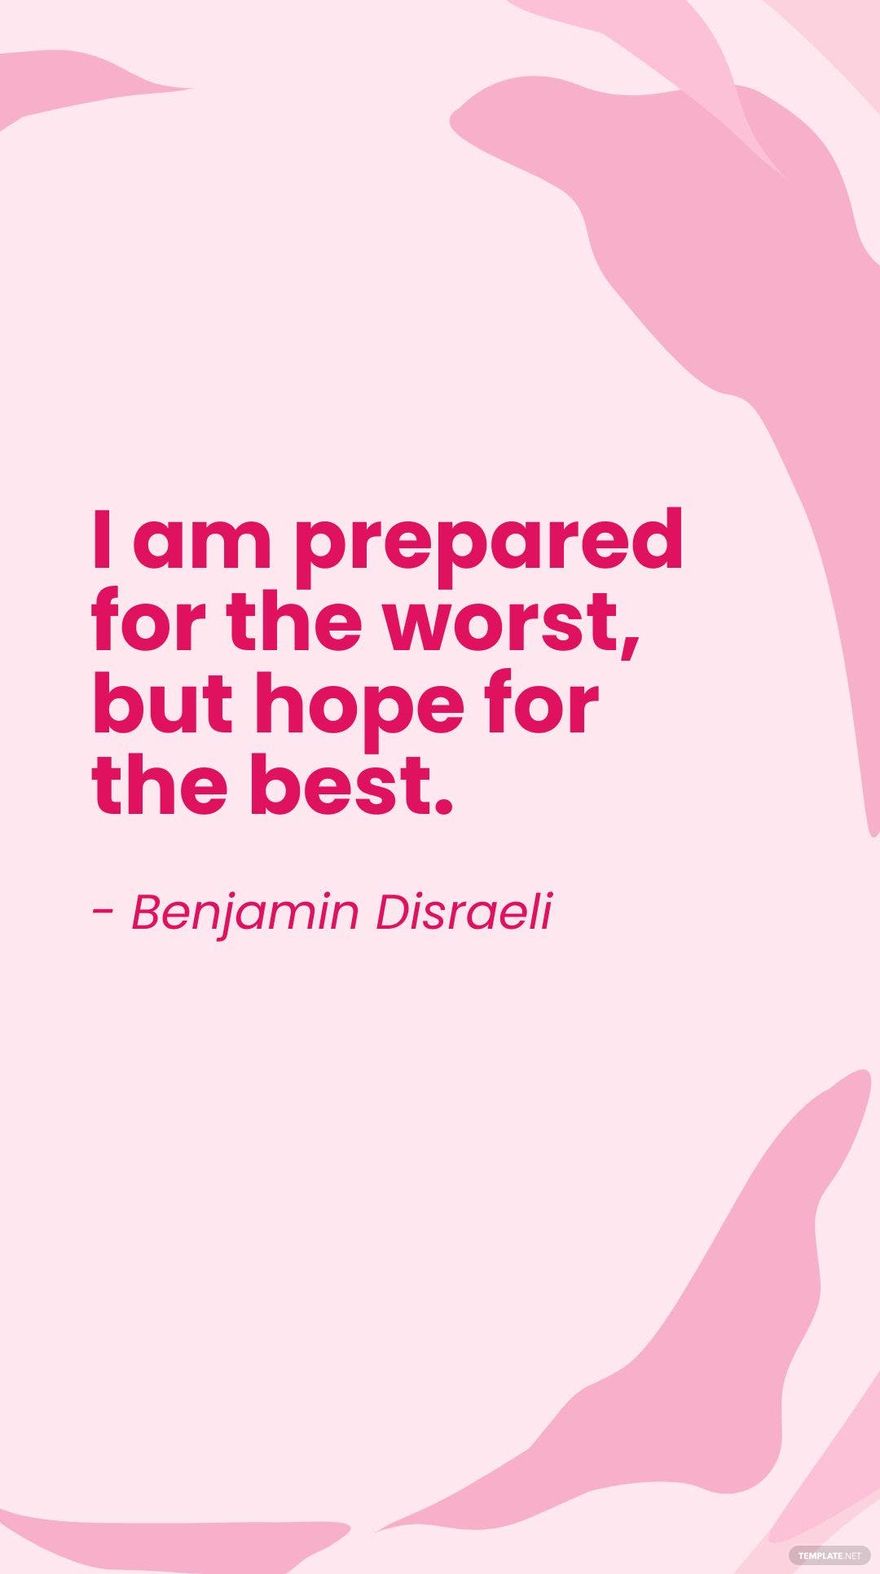 Benjamin Disraeli - I am prepared for the worst, but hope for the best.